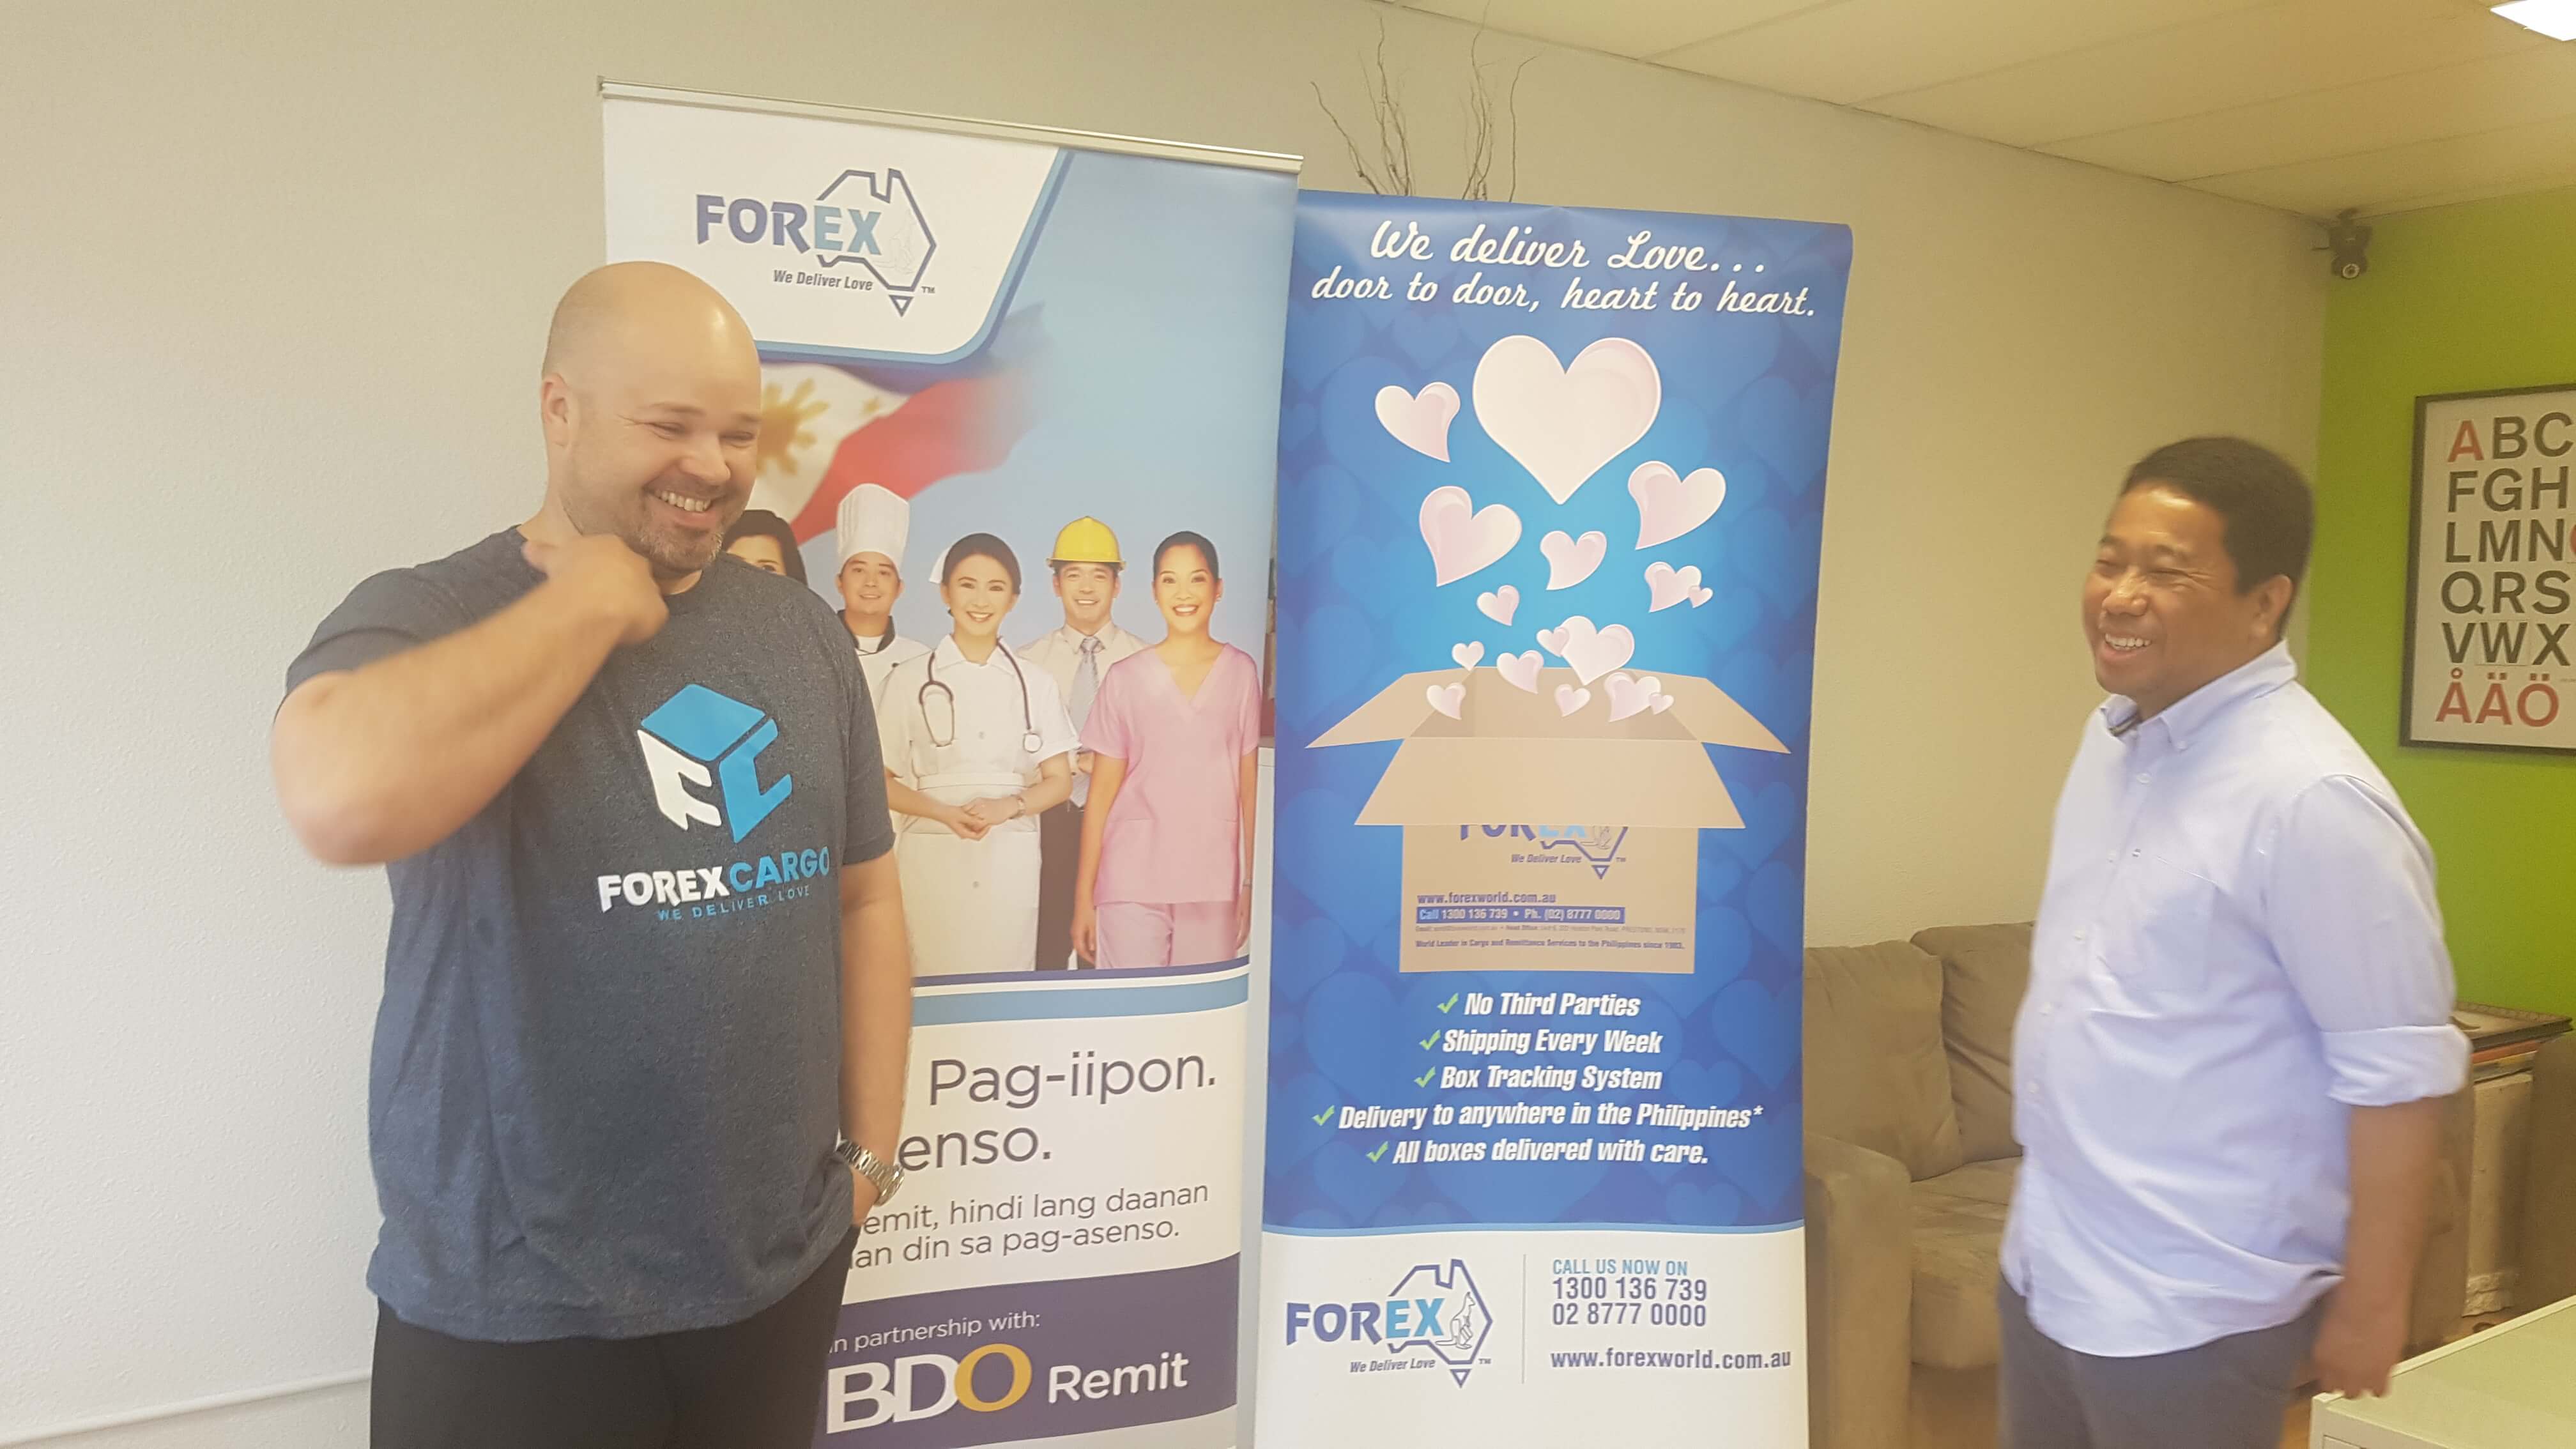 Ancop And Forexworld Delivering Love And Hope To Filipino Families - 